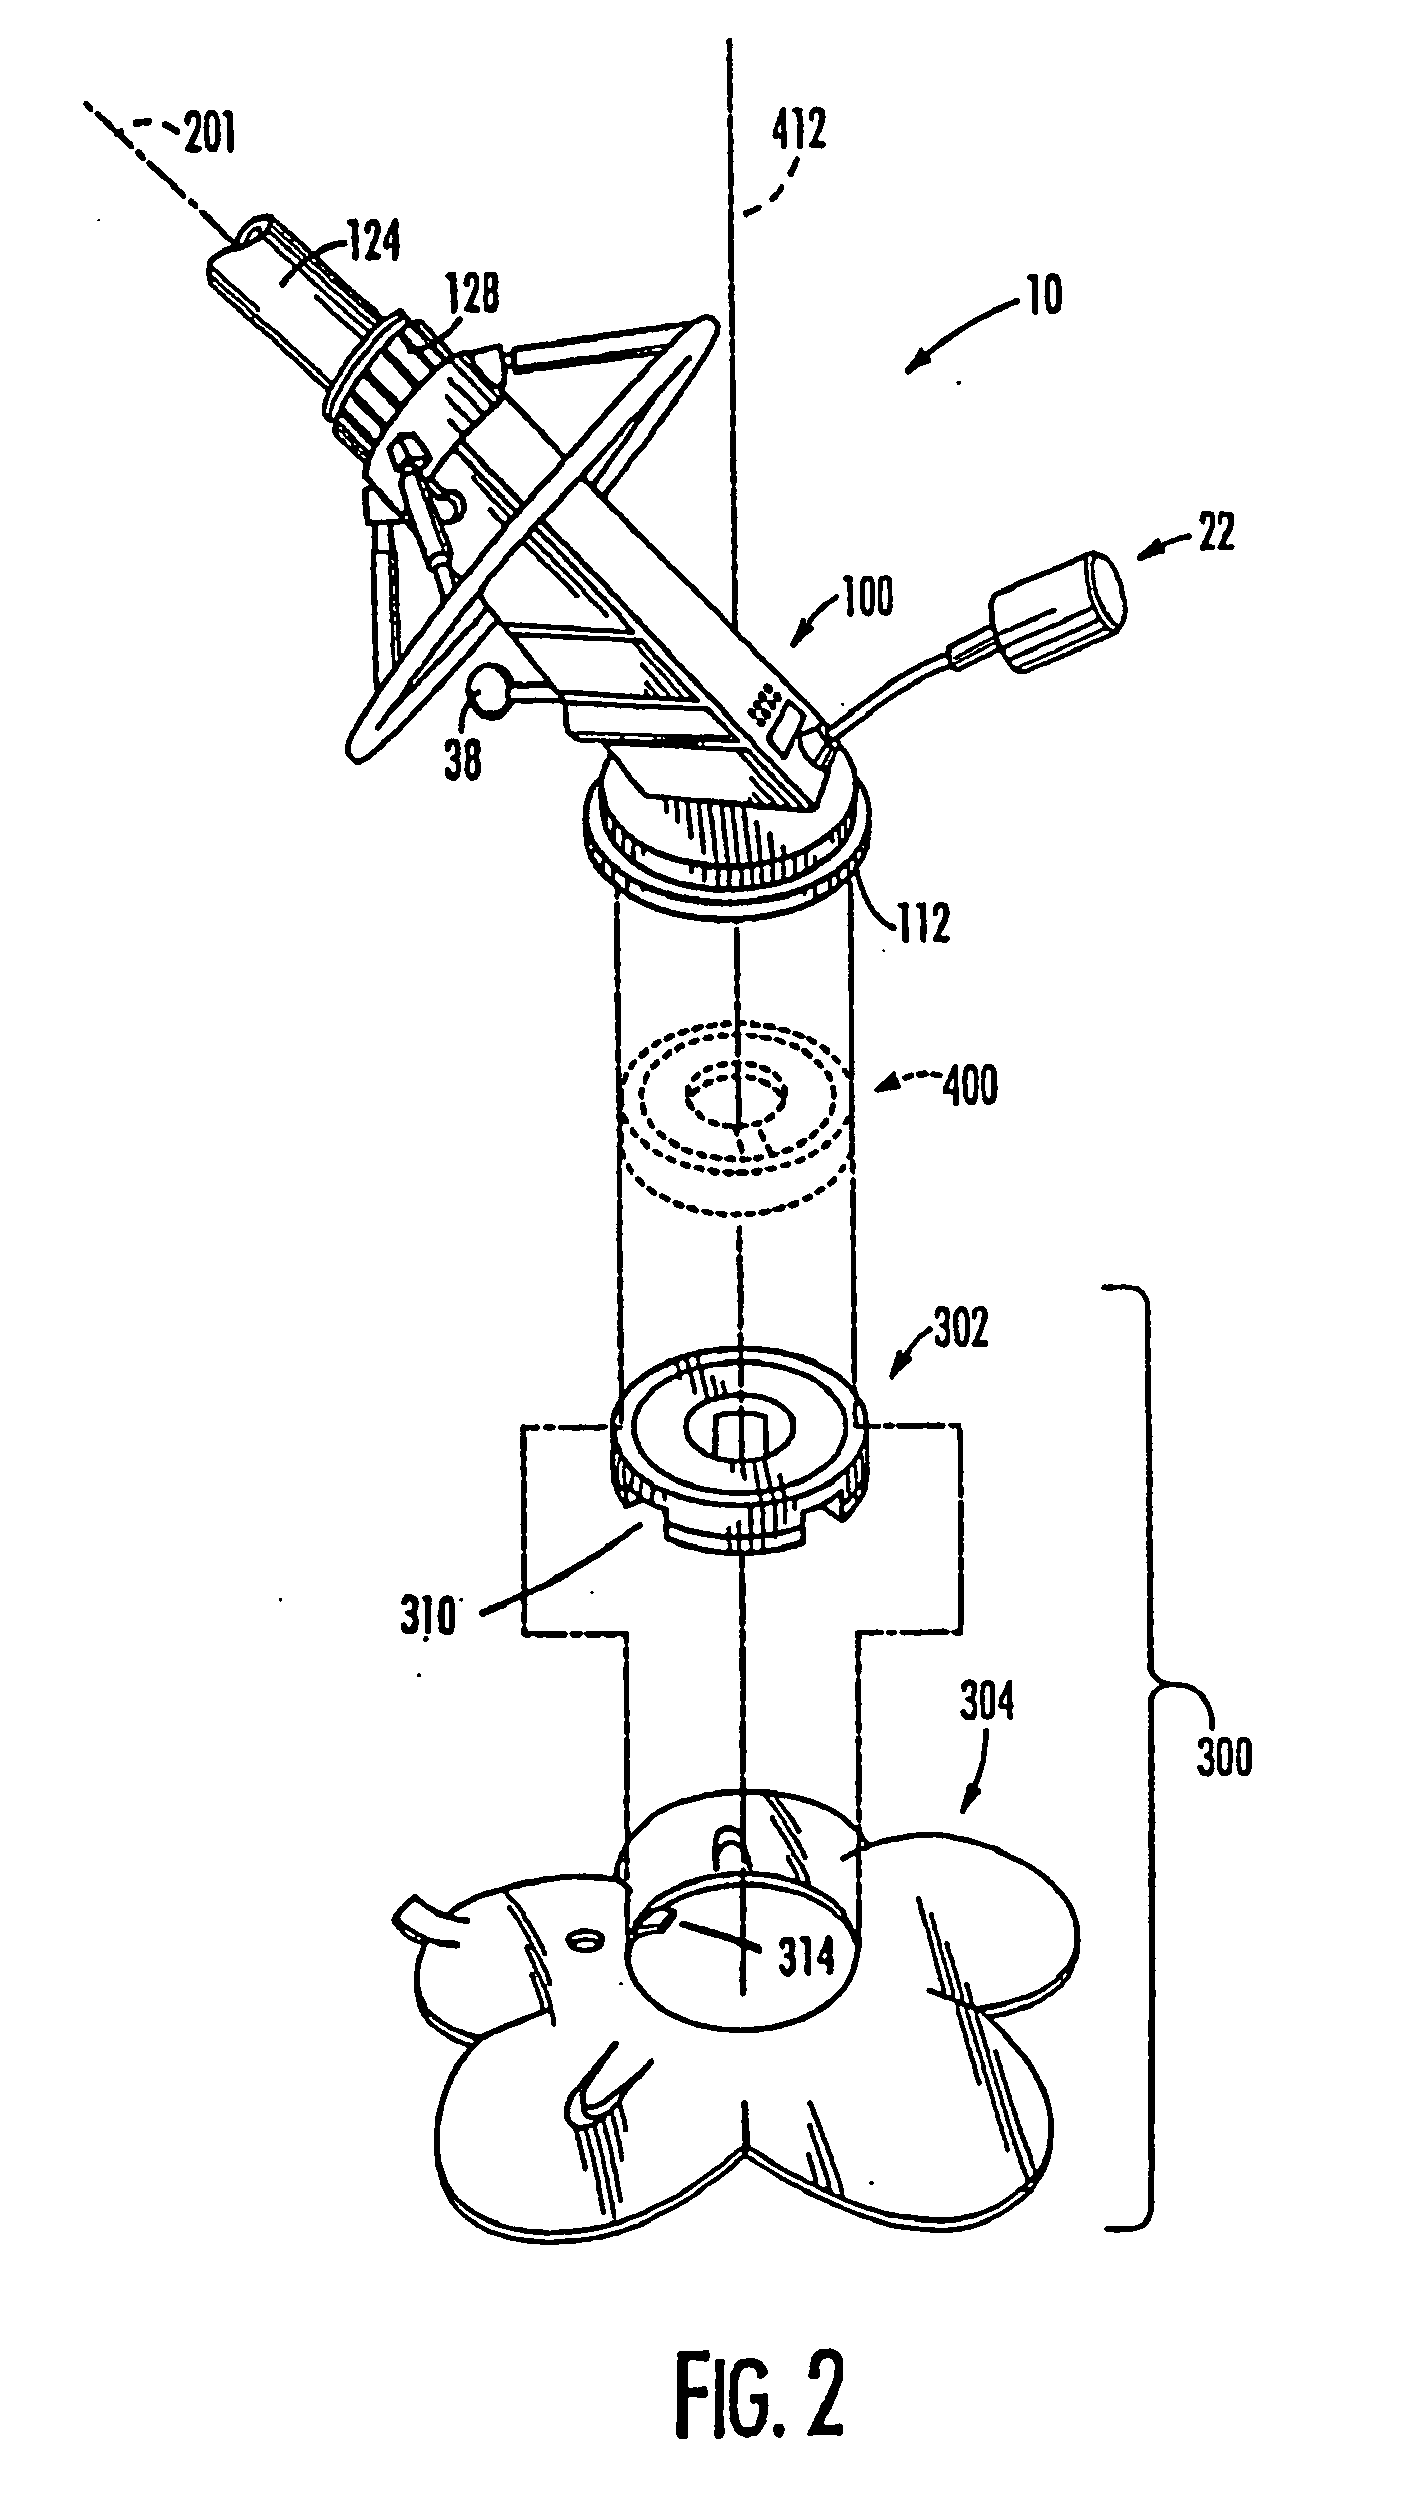 Submerged surface pool cleaning device